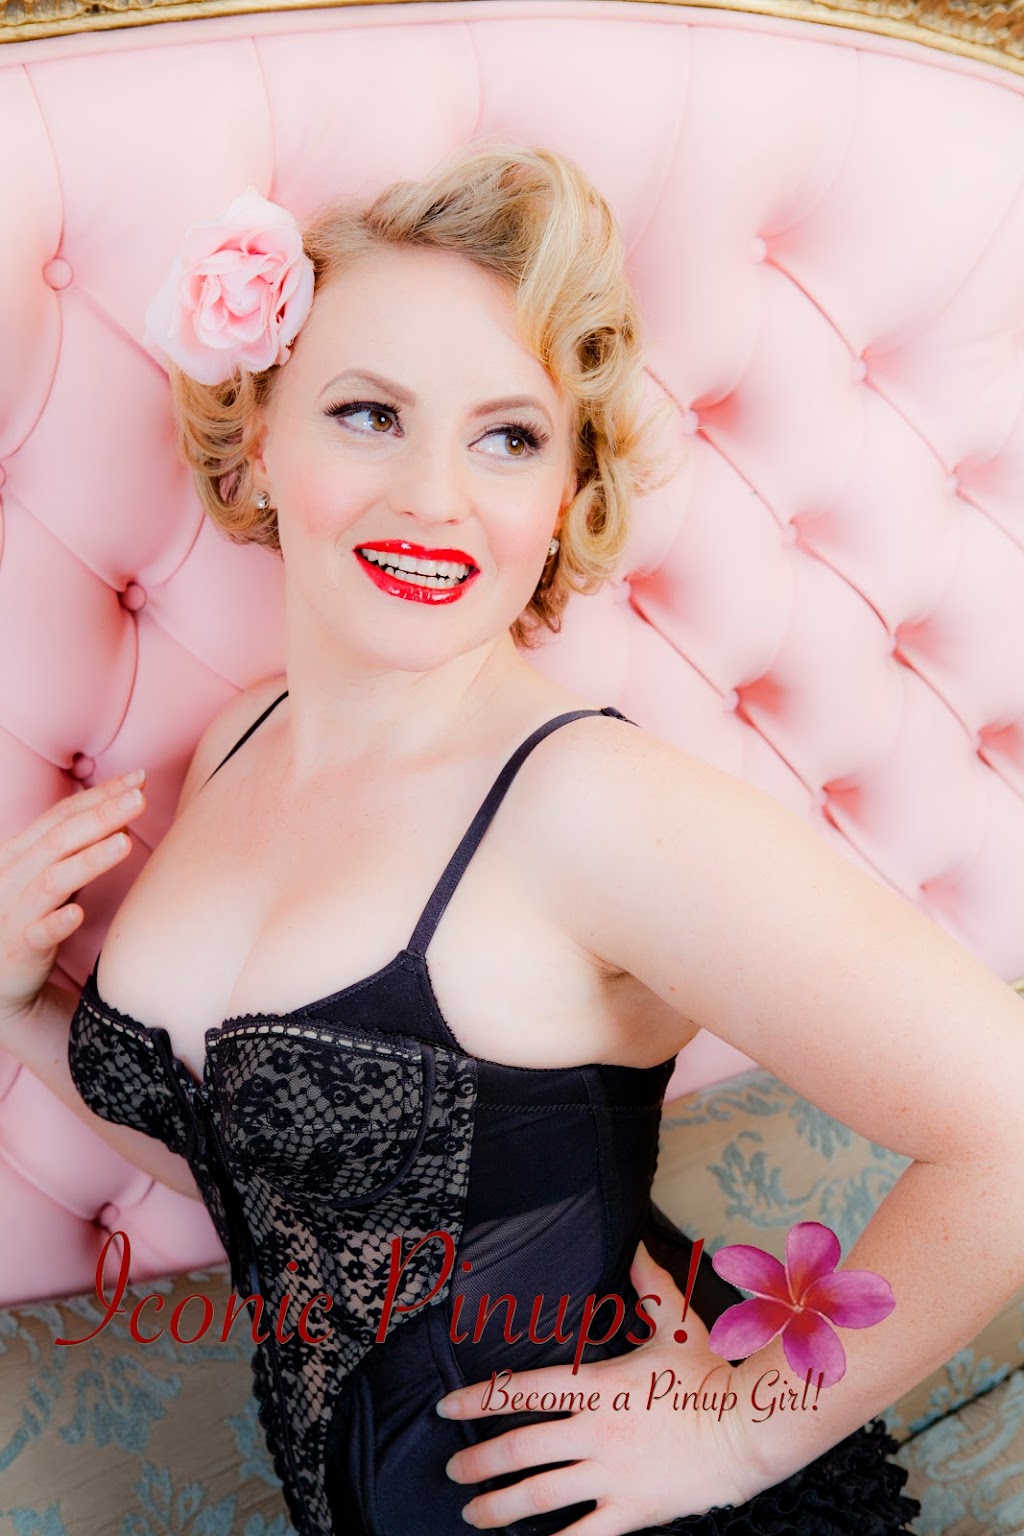 Bachelorette Pin Up Parties Iconic Pinups! | 4018 Elderbank Dr, Los Angeles, CA 90031, USA | Phone: (323) 662-5411